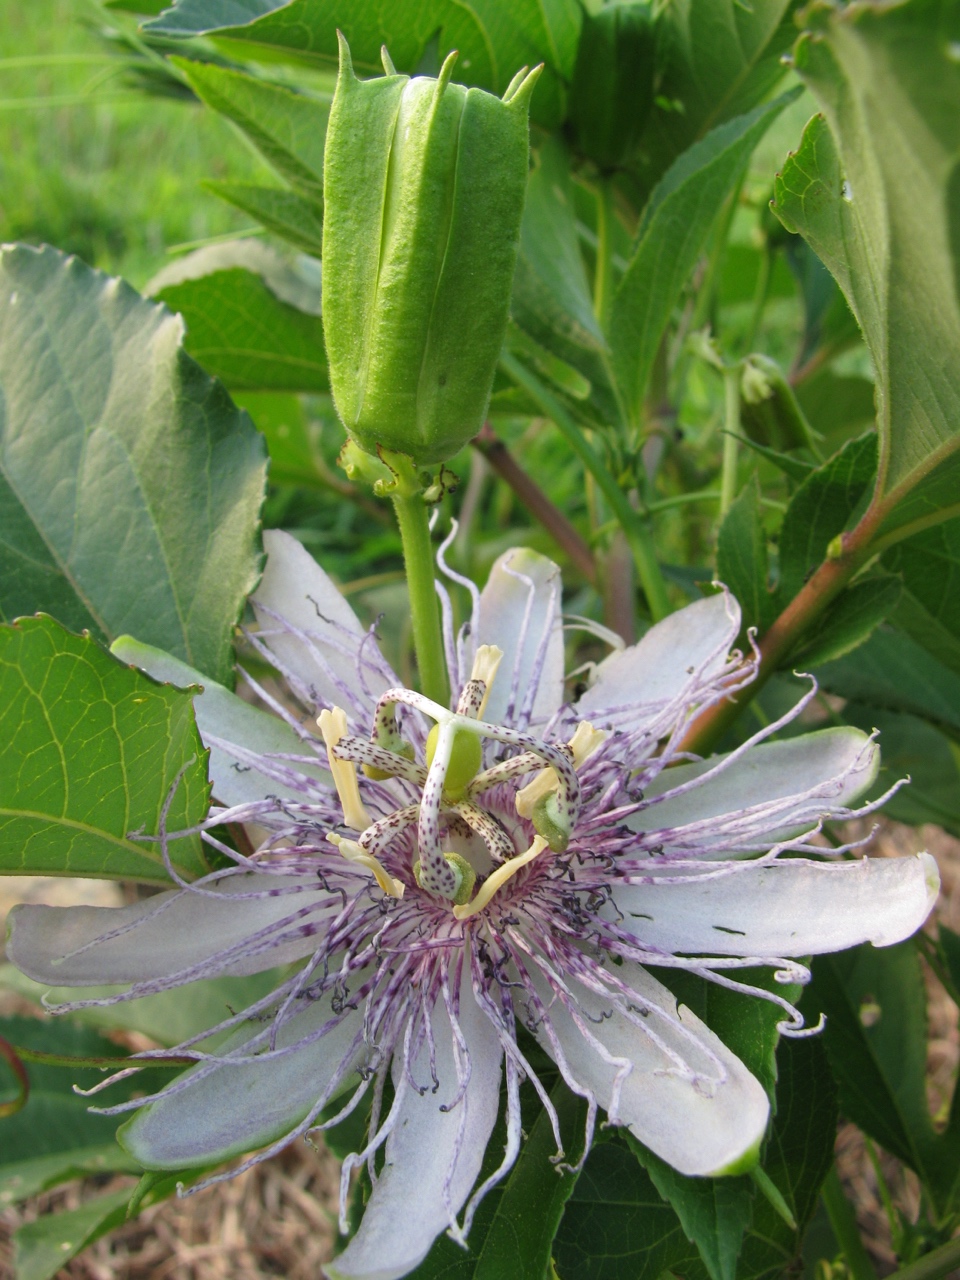 The Scientific Name is Passiflora incarnata. You will likely hear them called Purple Passionflower, Passion-vine, Maypops. This picture shows the Flower and flower bud. of Passiflora incarnata